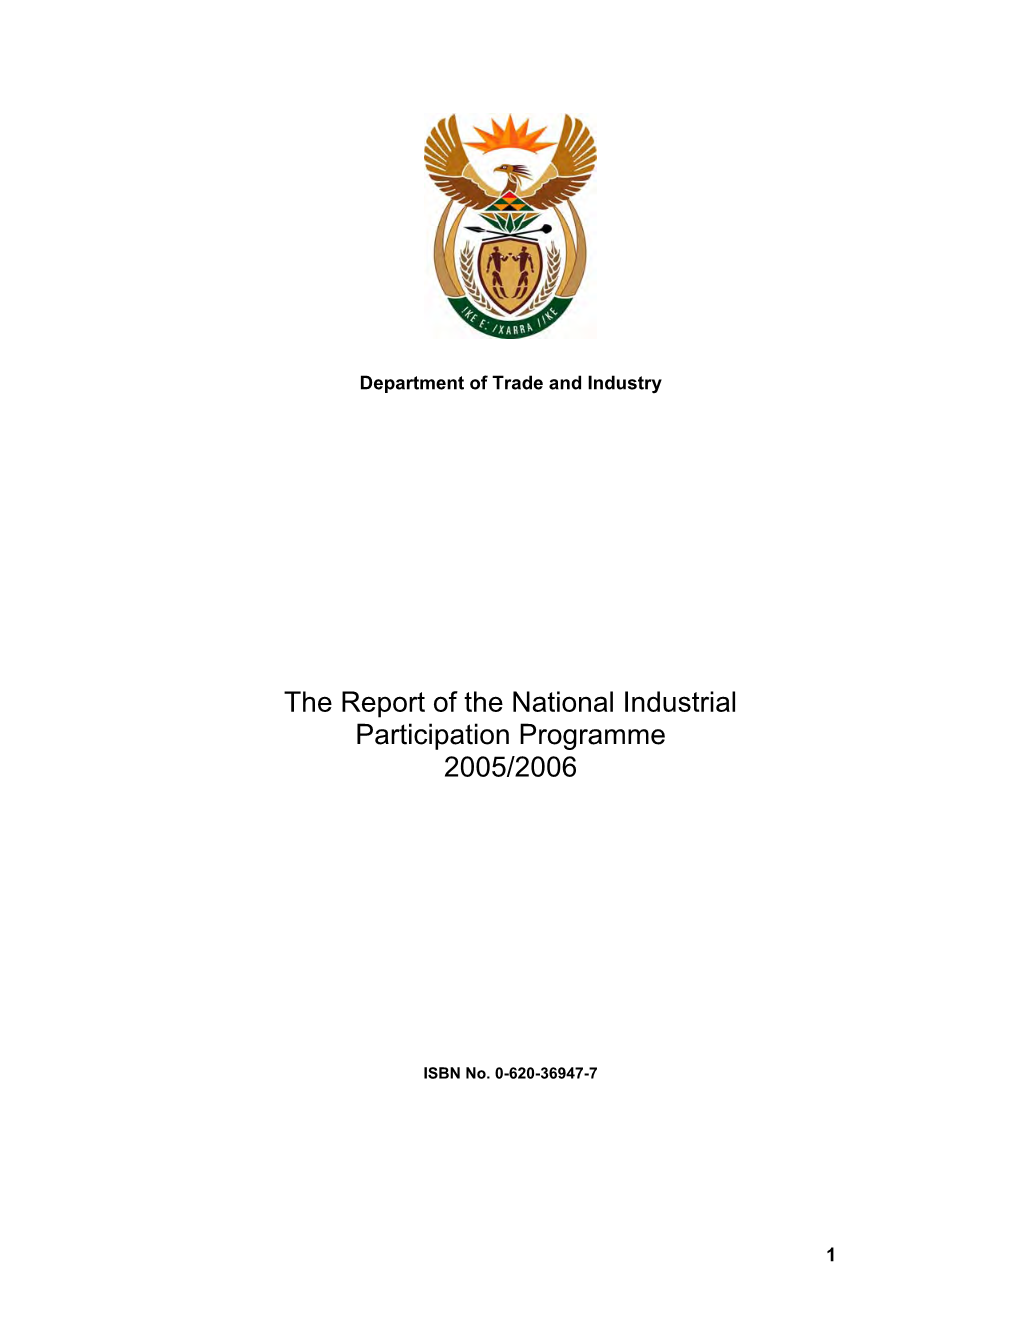 The Report of the National Industrial Participation Programme 2005/2006